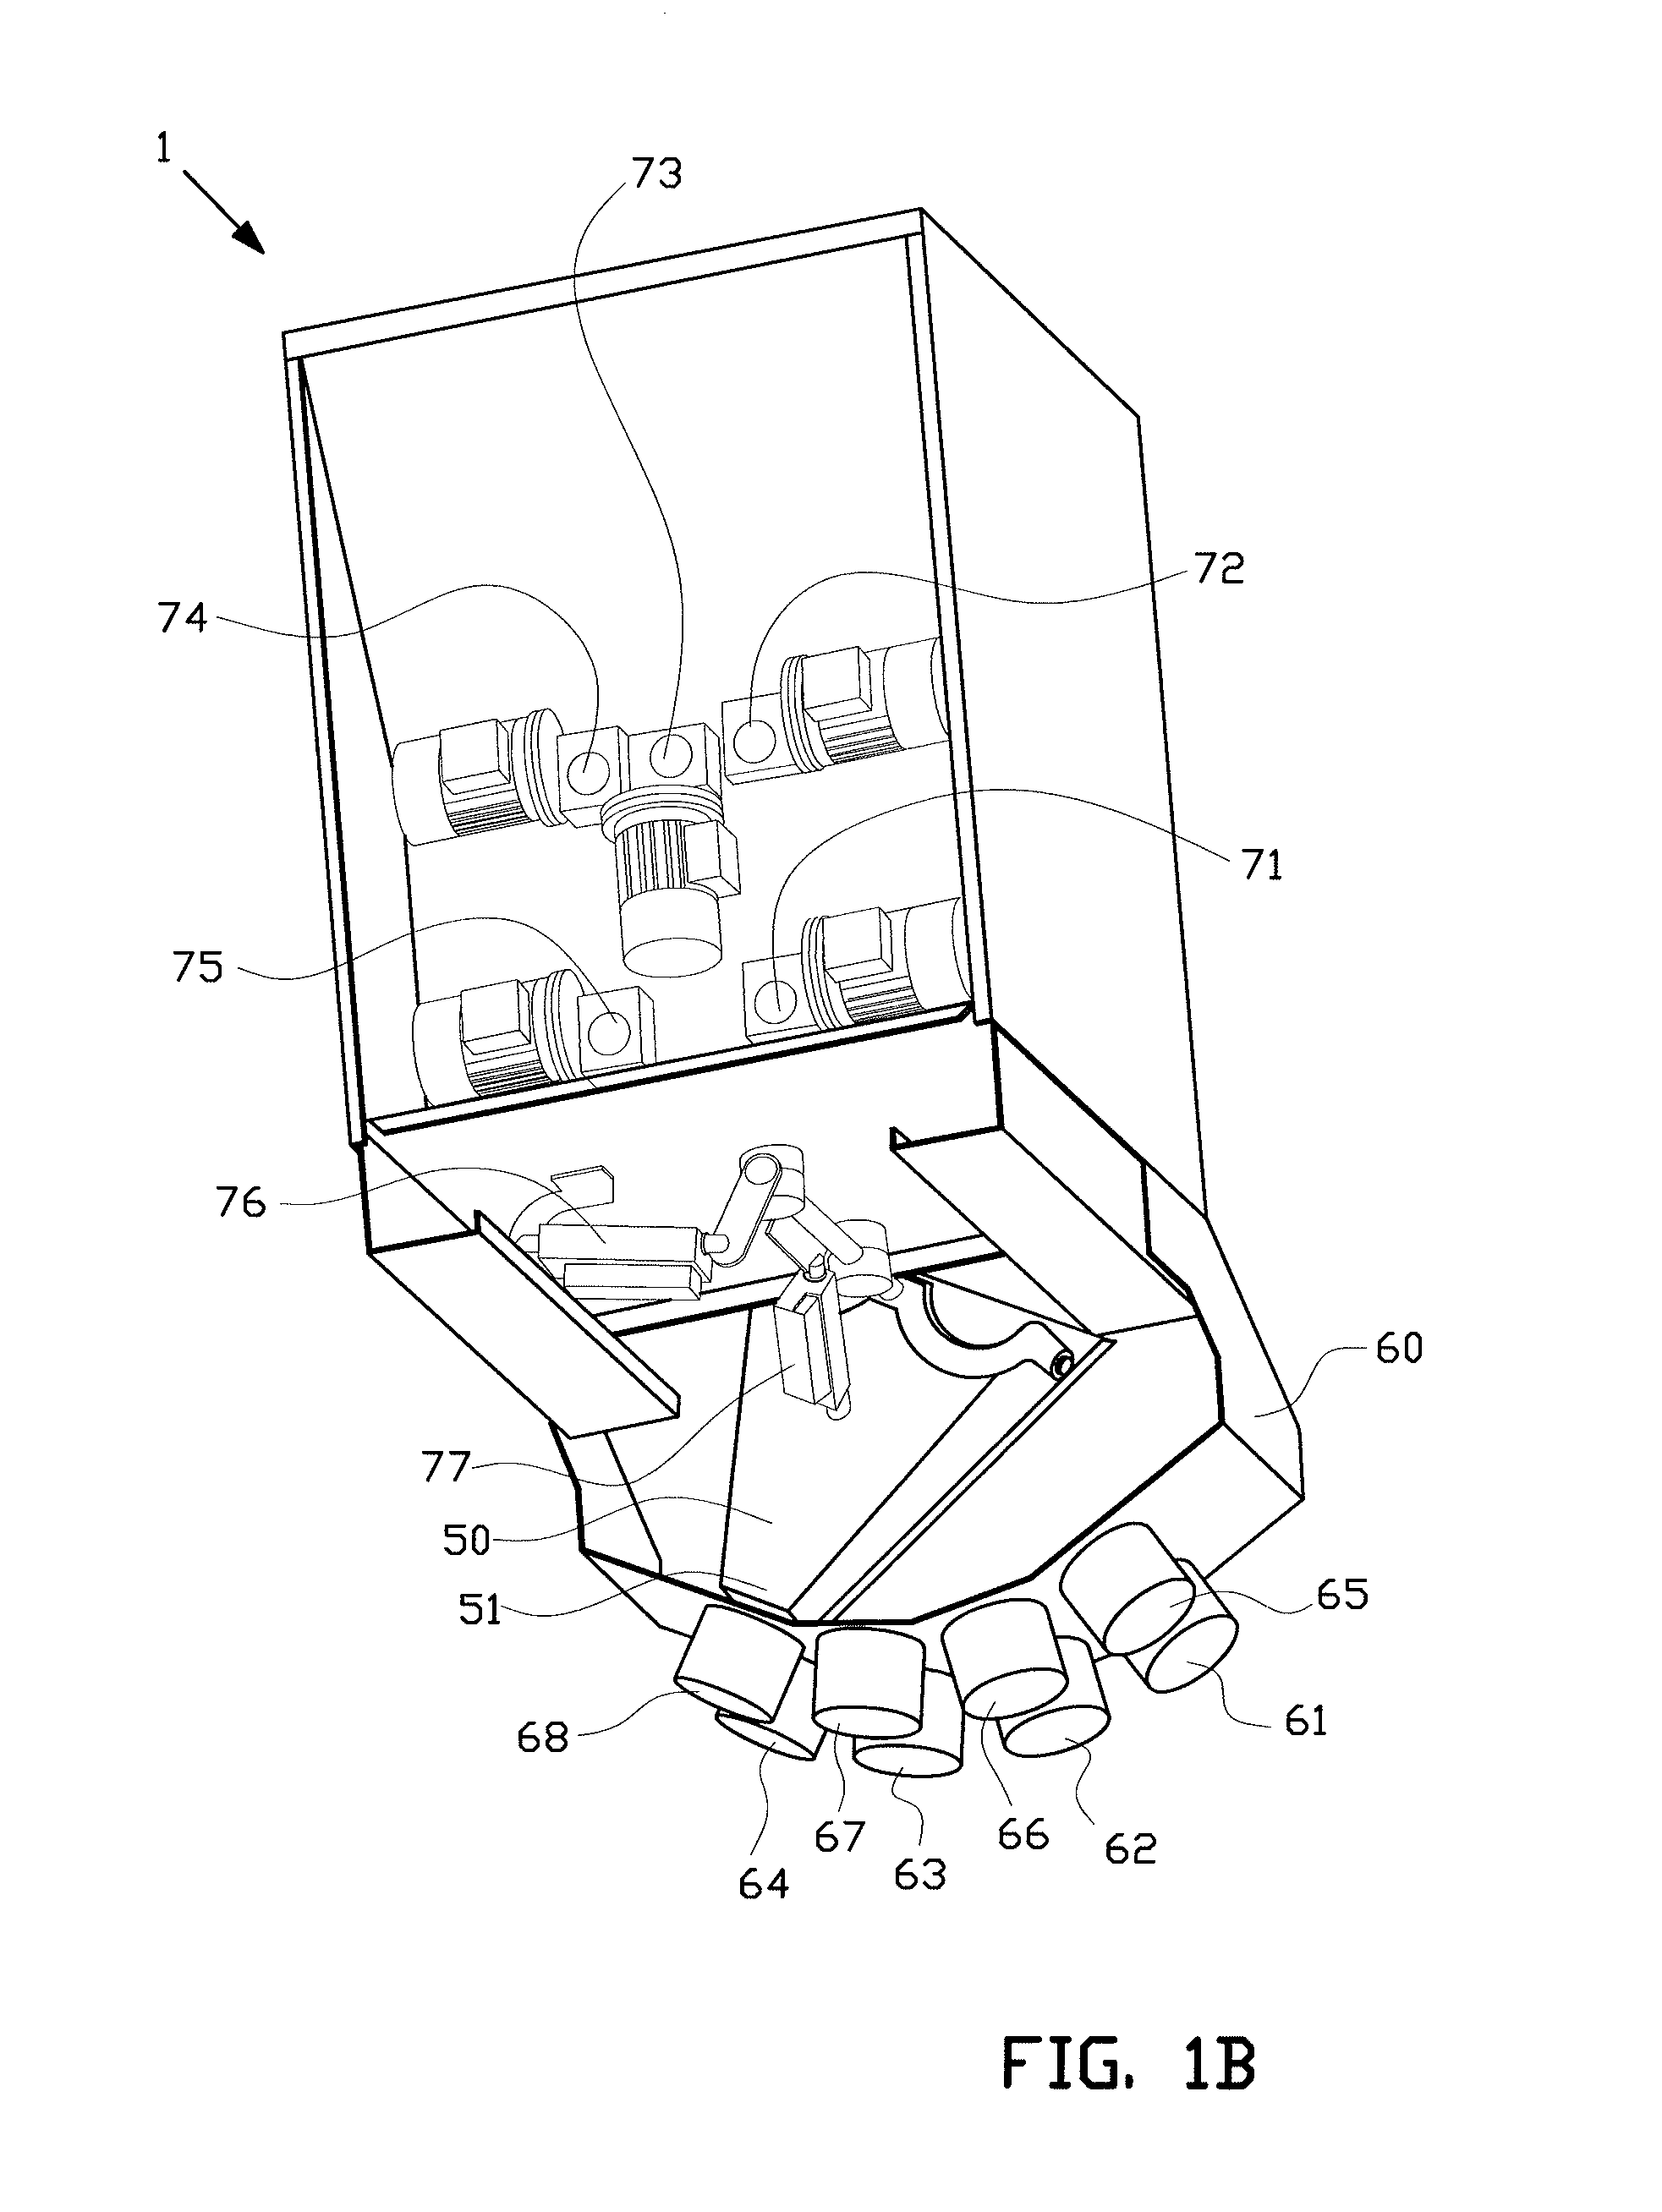 Mixing and dosing device for cattle feed